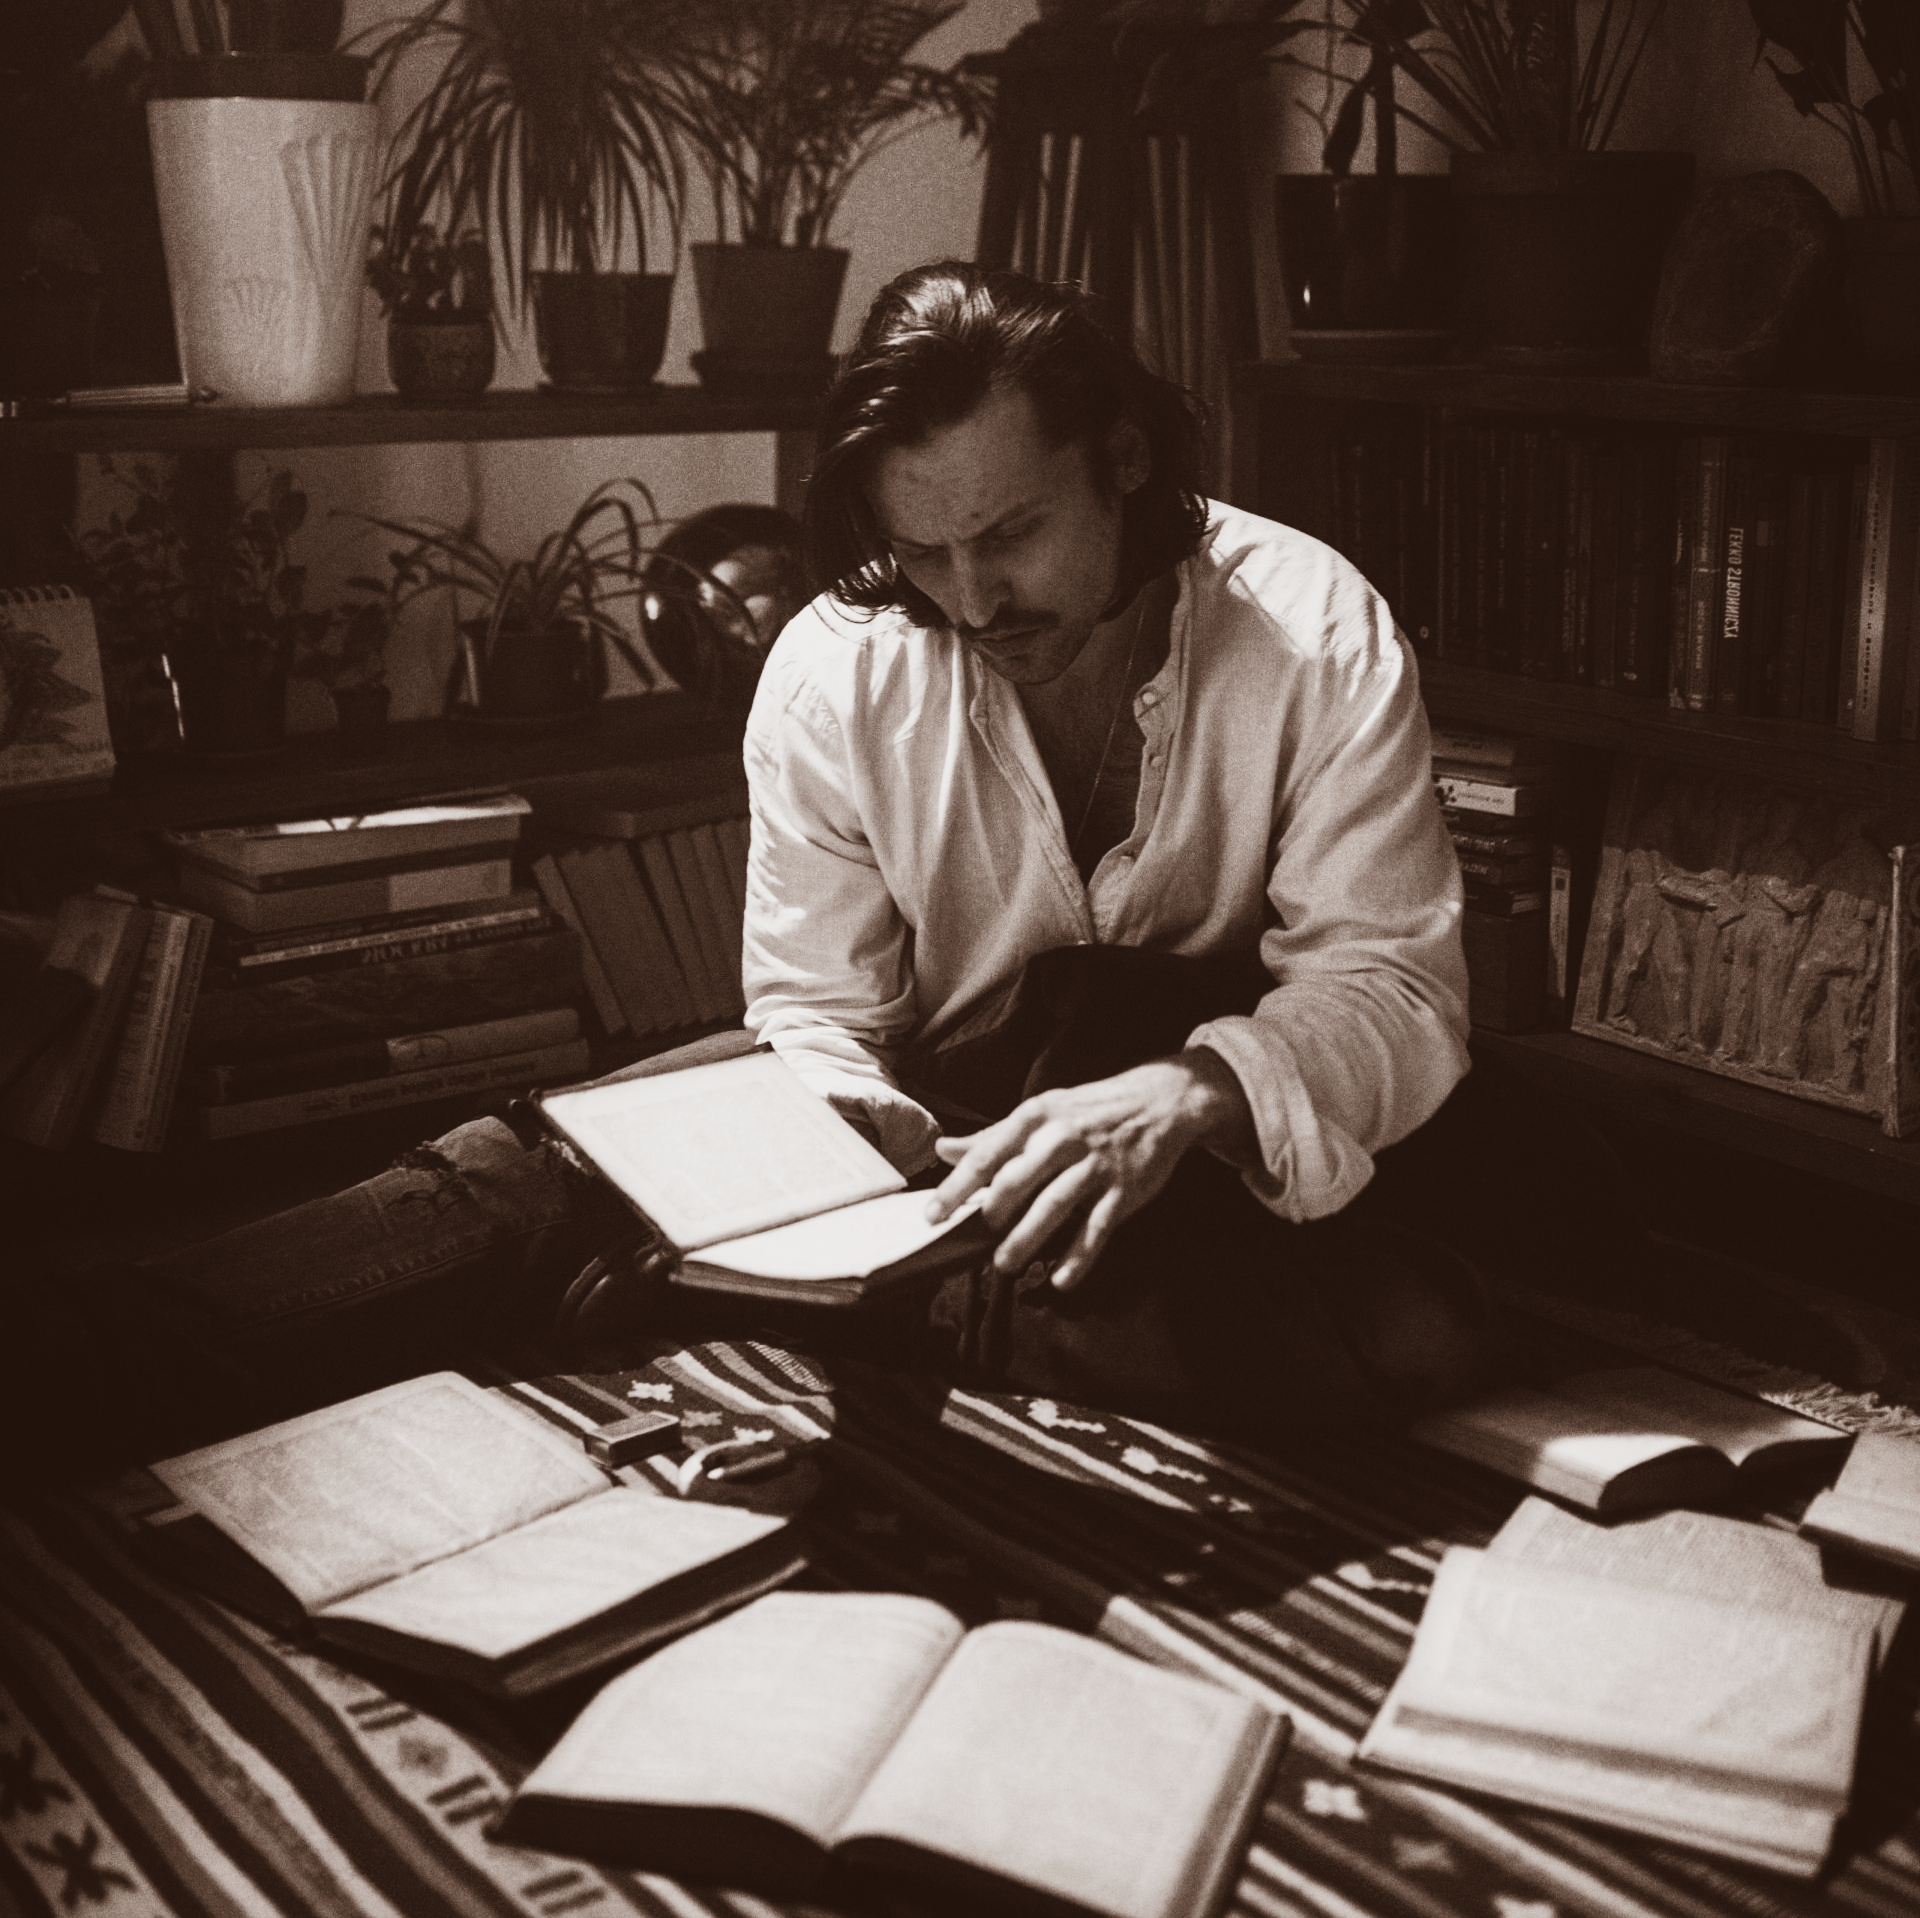 poet or story teller reading from his book surrounded by books